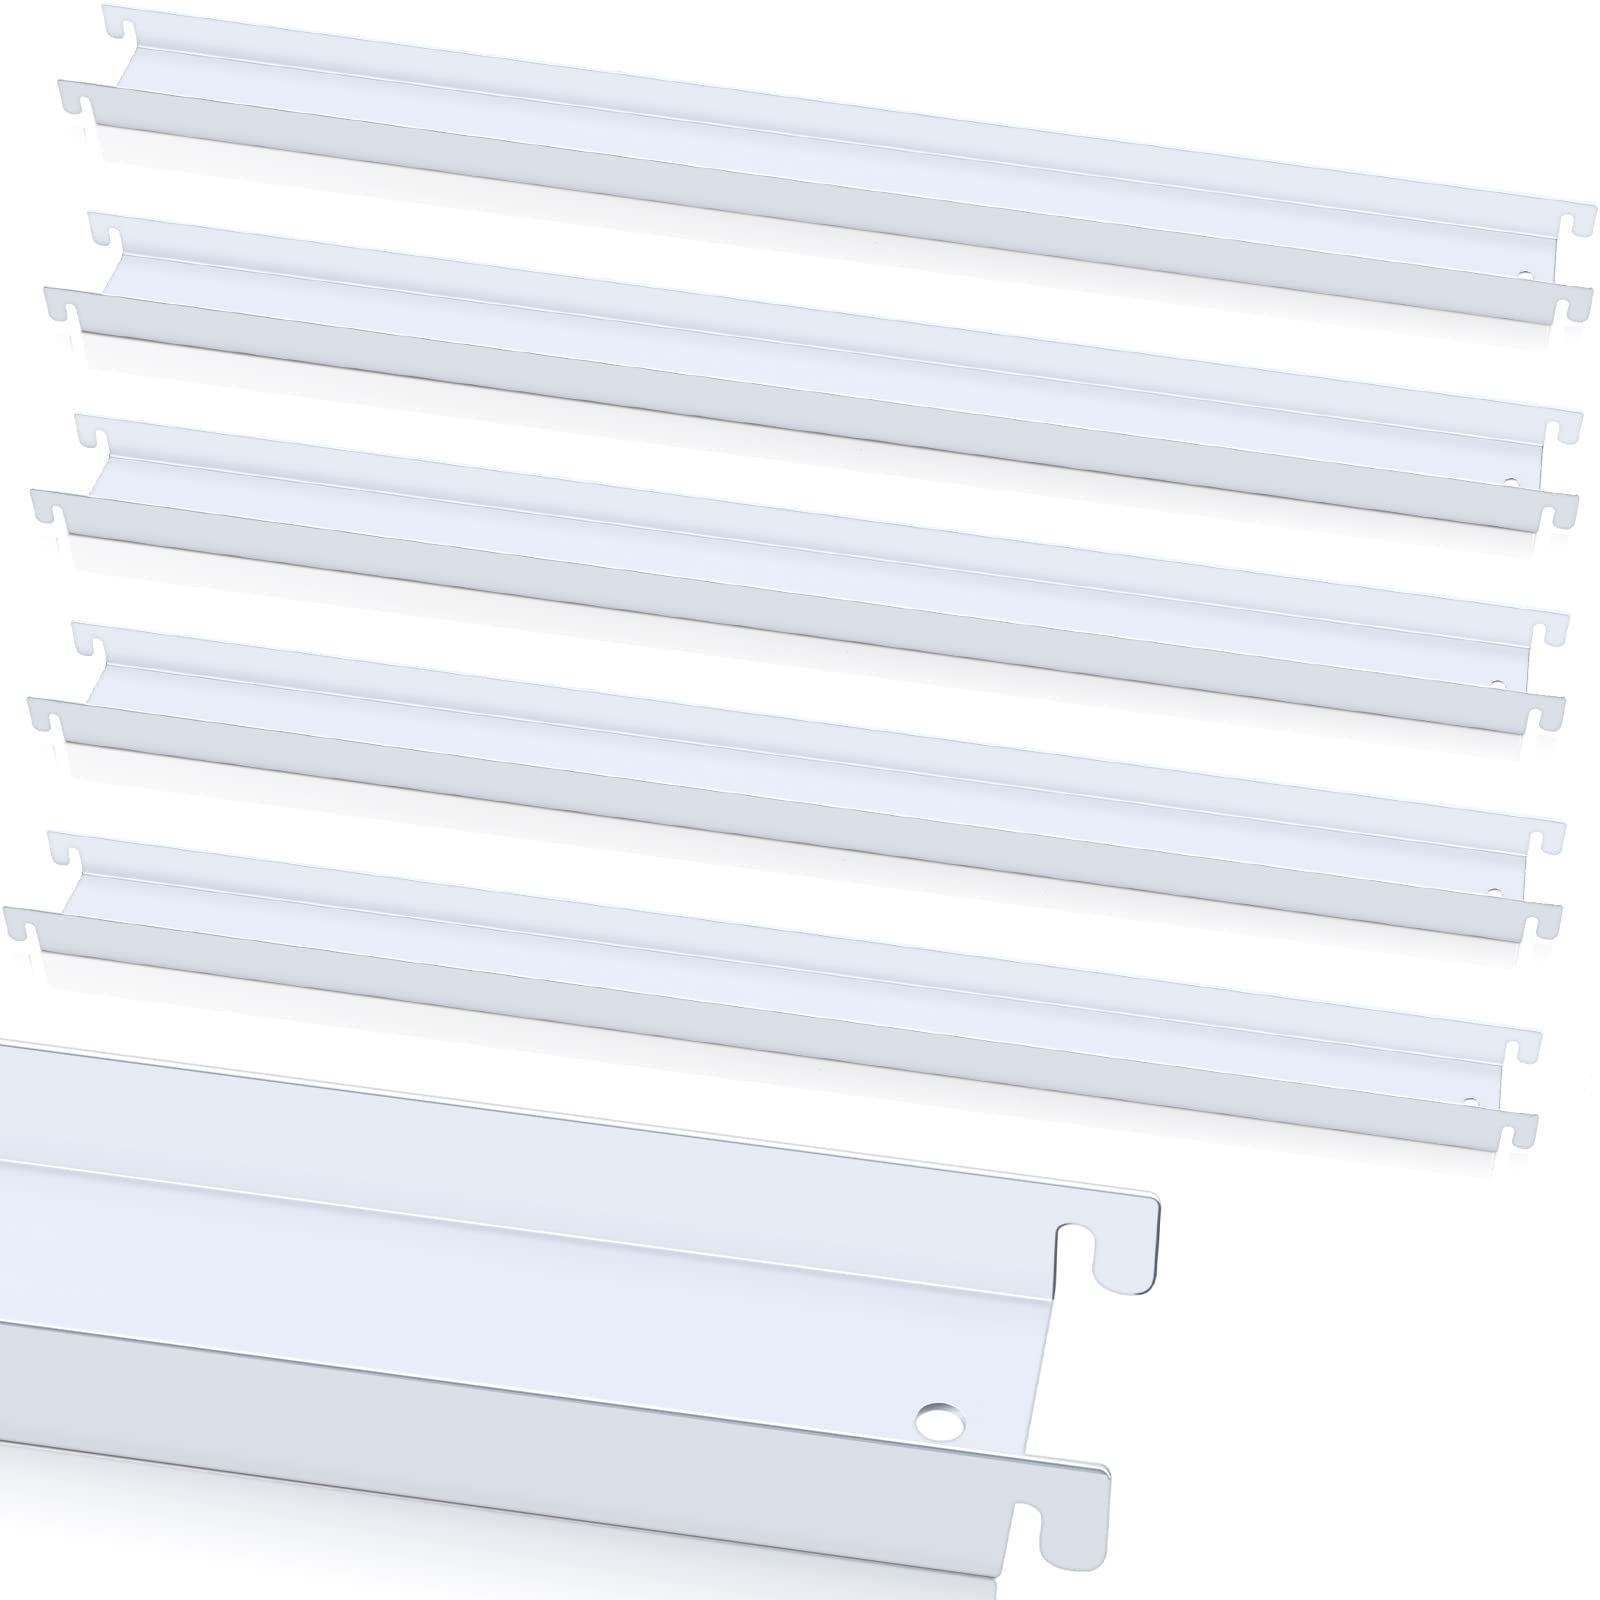 6 Pcs Filing Front to Back Rails Lateral Hanging File Bar Stainless Steel White File Cabinet Rails File Cabinet Inserts for Folders Office Home 15.76 Inches Long